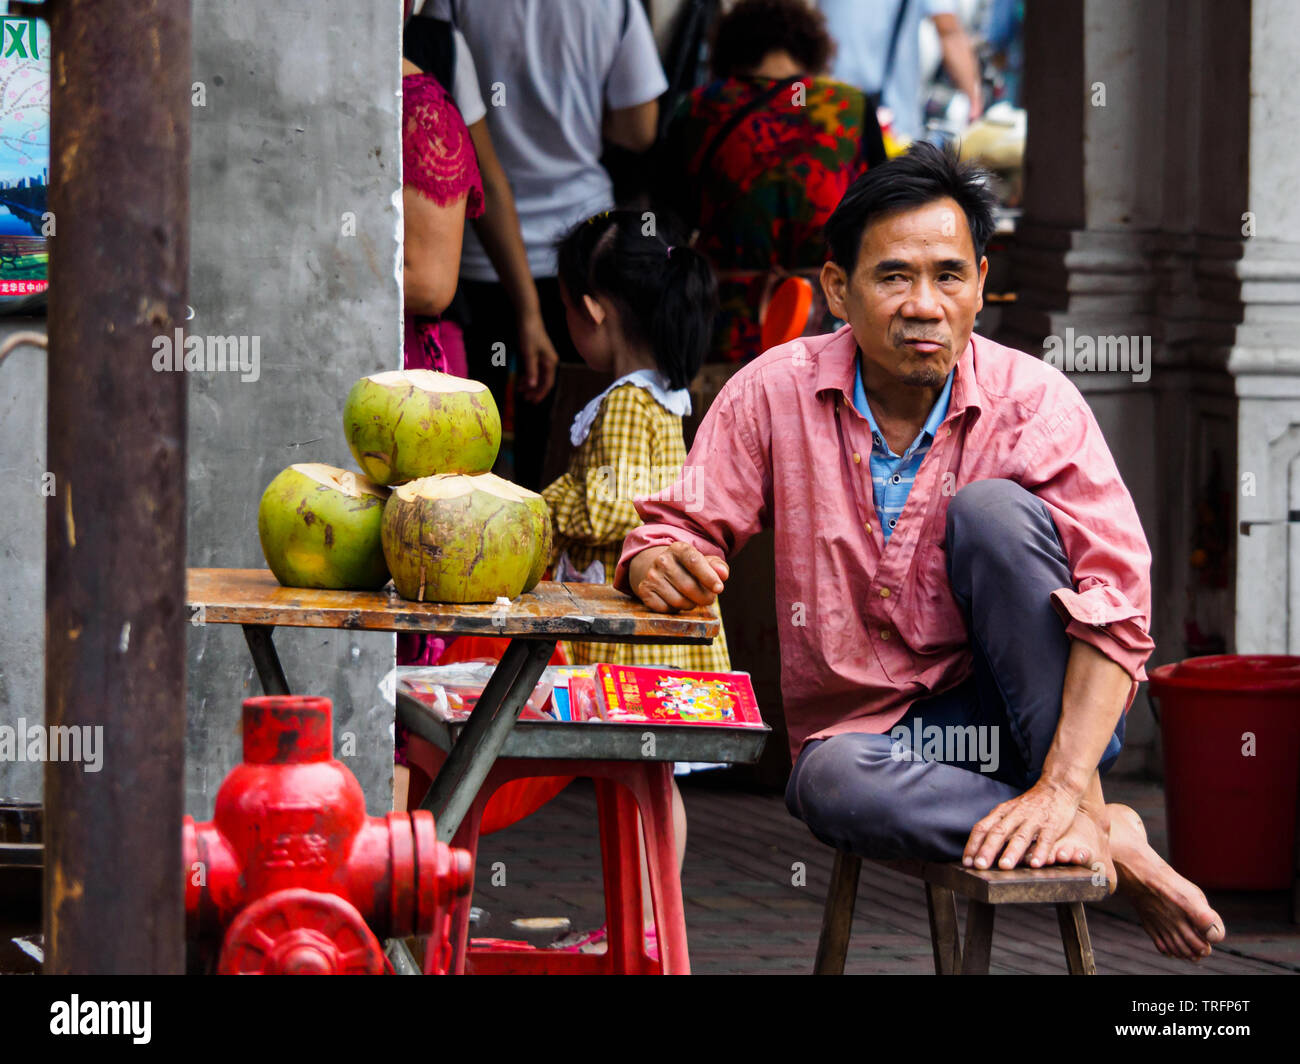 HAIKOU, HAINAN, CHINA - MAR 2 2019 - A street vendor selling coconut water, a popular local beverage Stock Photo